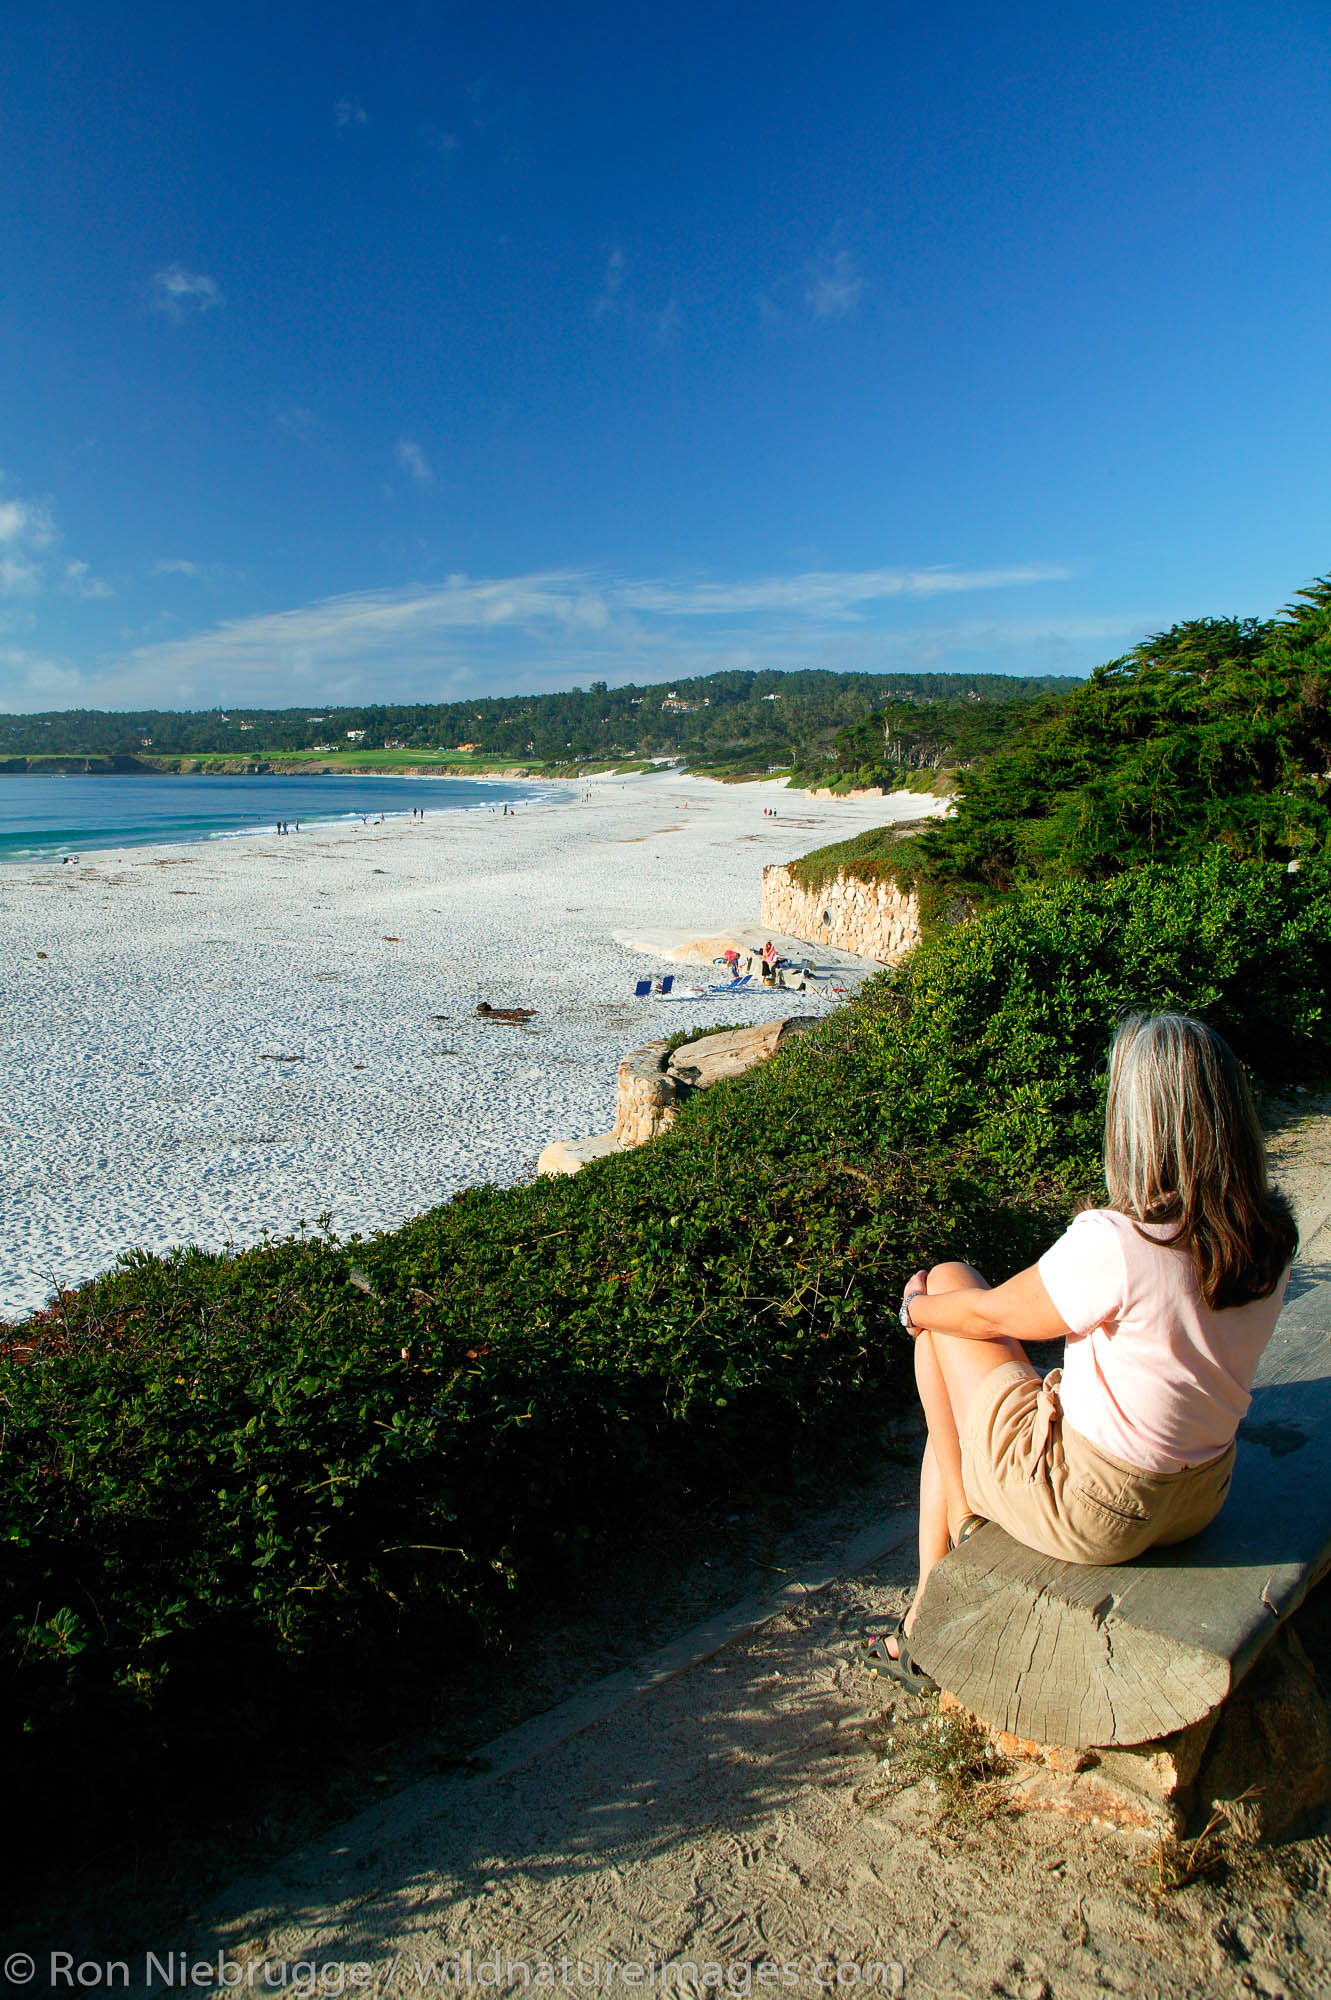 A visitor (mr) enjoys the beach and bay at Carmel By The Sea, California.